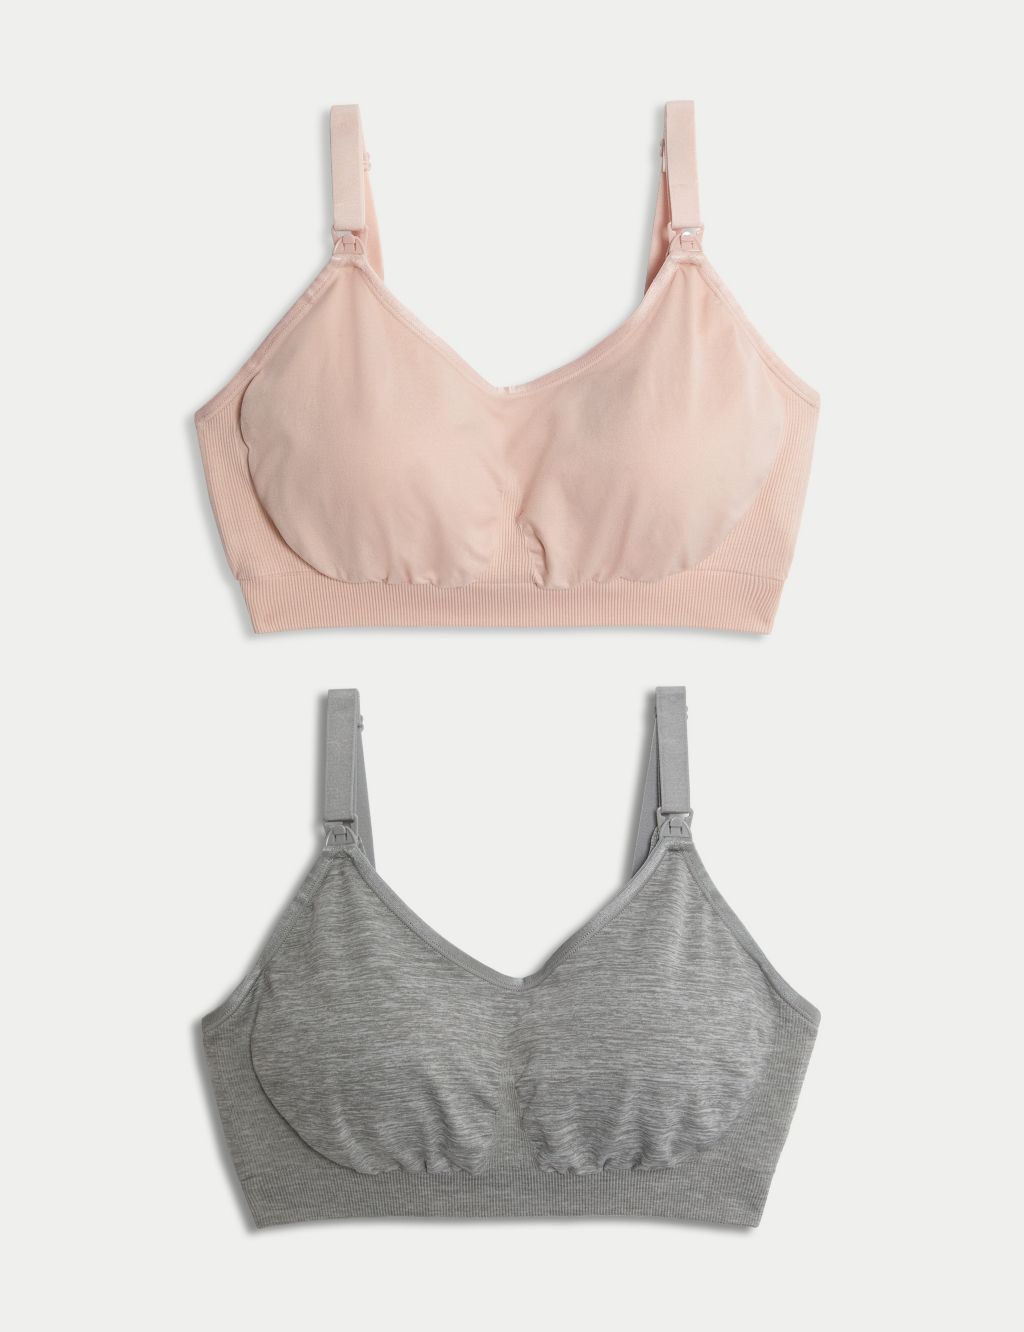 M&S COLLECTION 2PACK MATERNITY NURSING NON WIRED T-SHIRT BRA BNWT ALMOND MIX